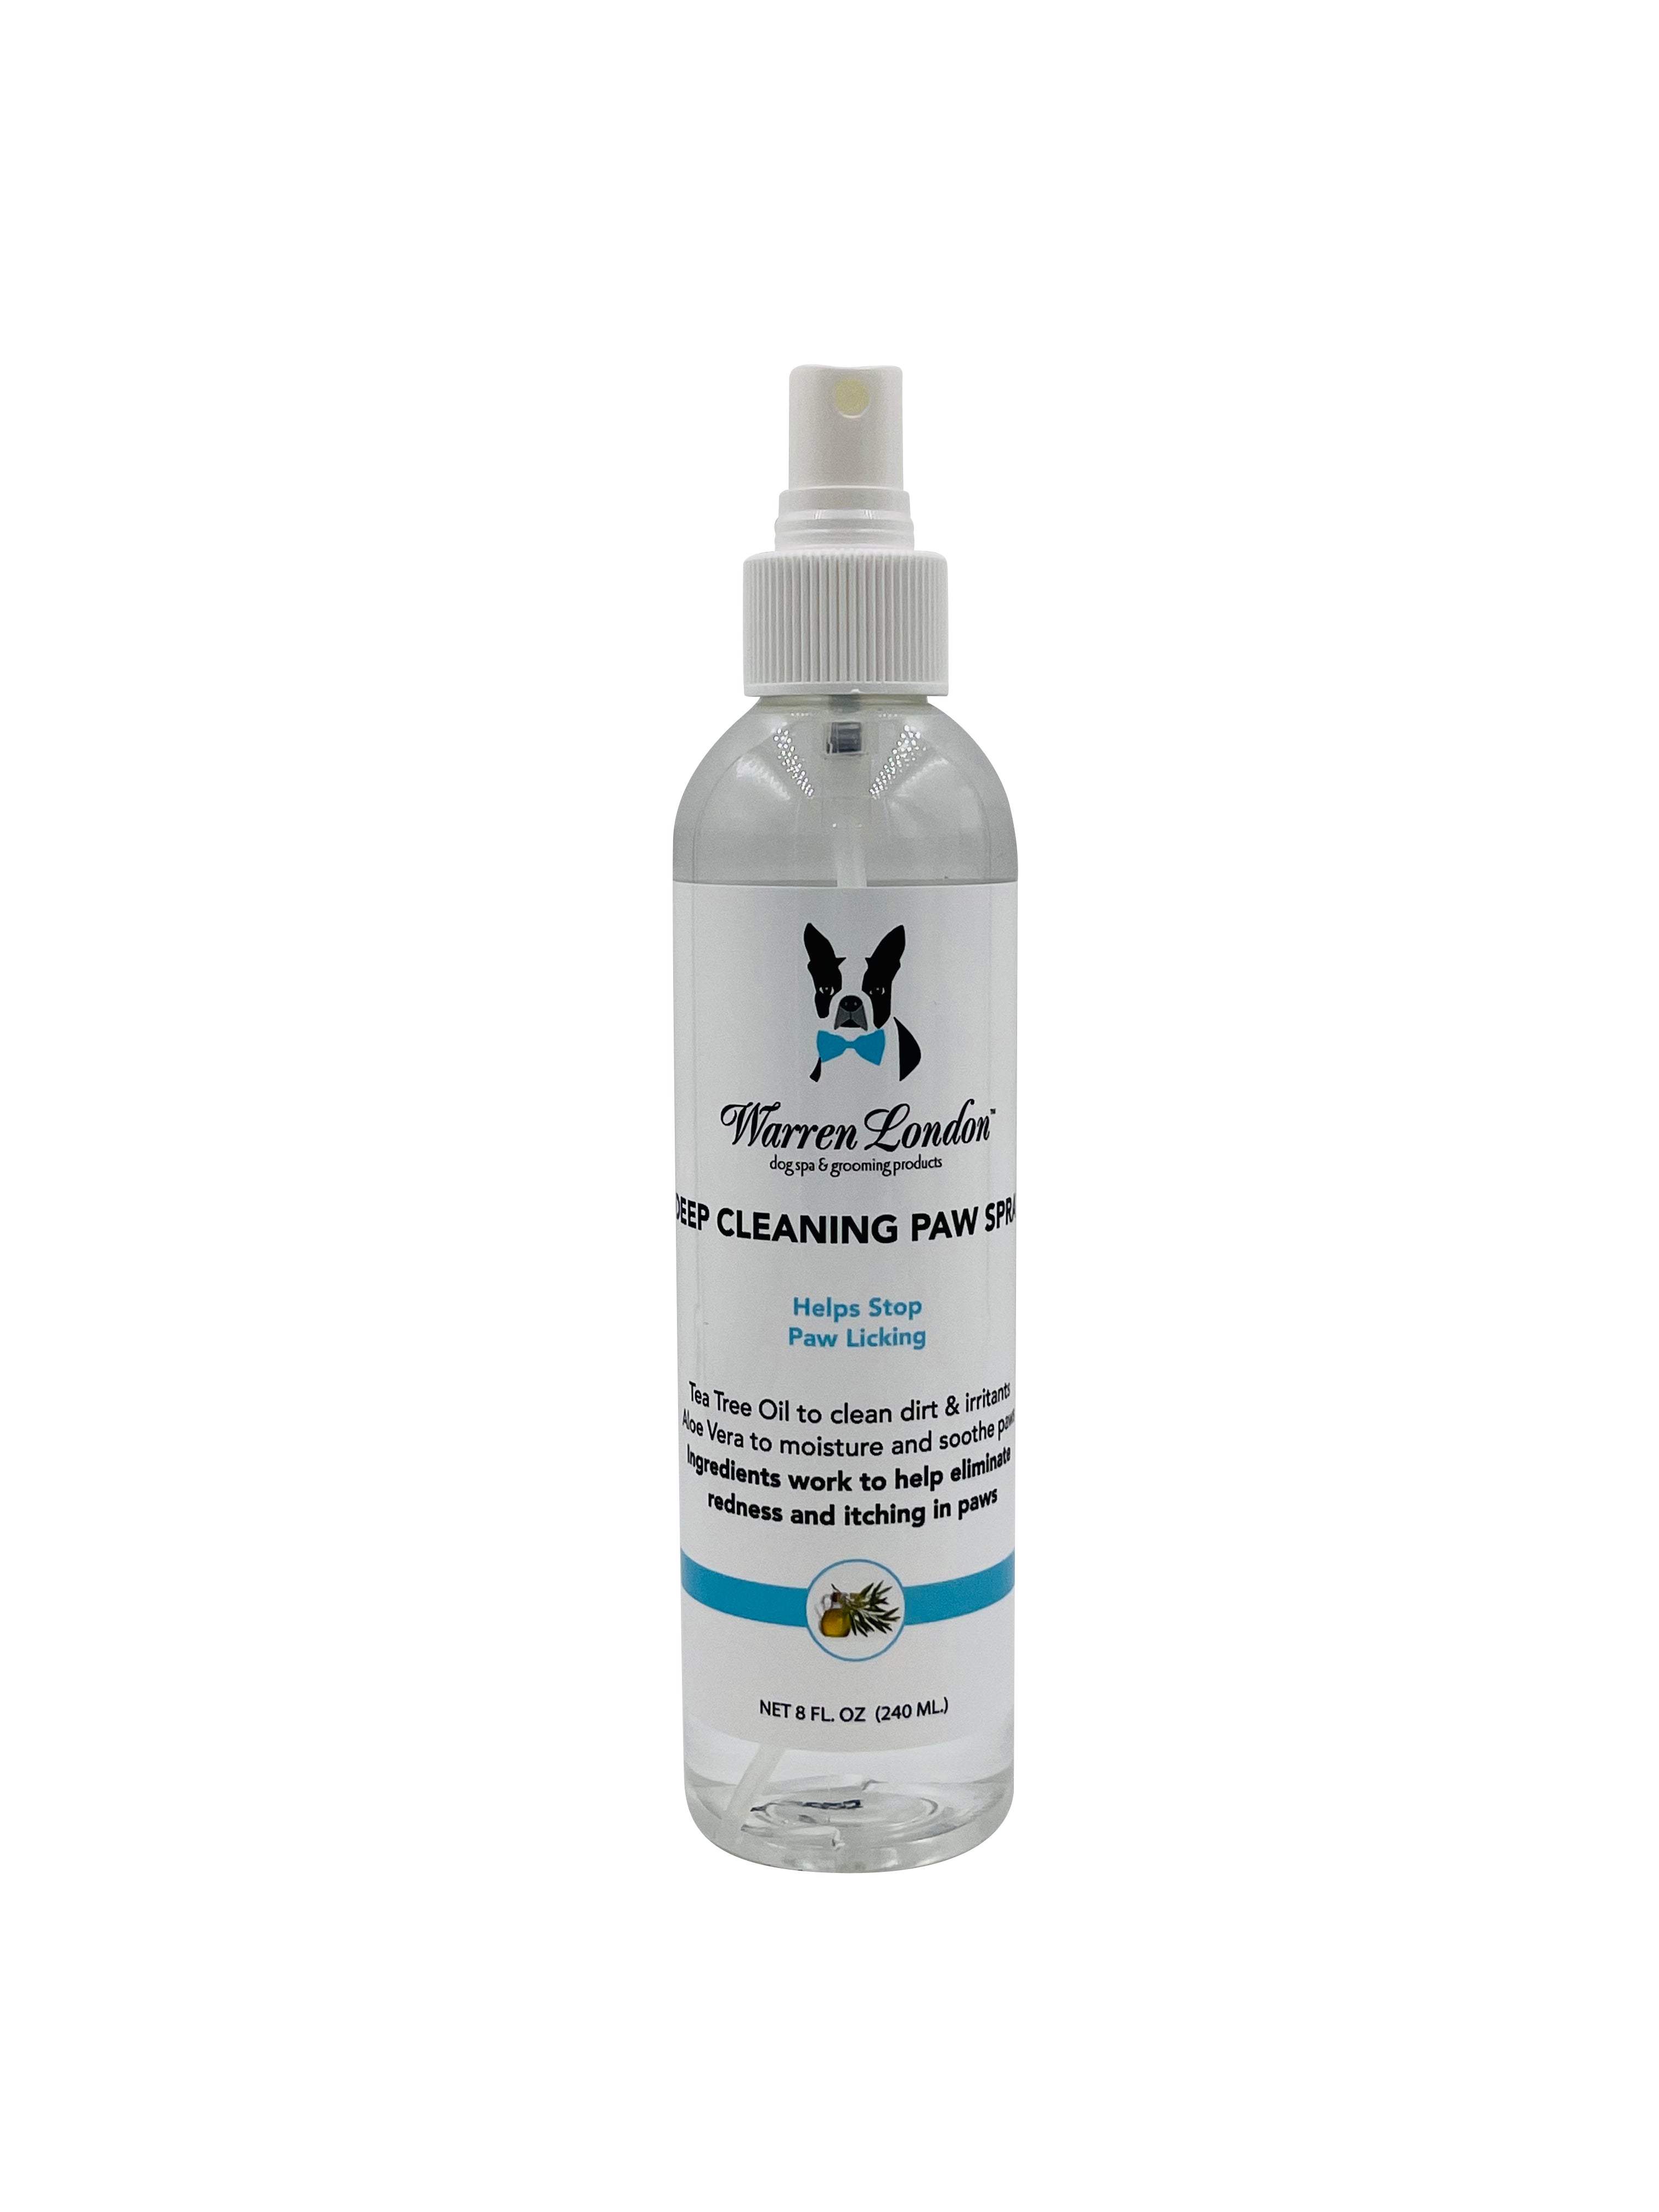 Deep Cleaning Paw Spray for Dogs – Warren London